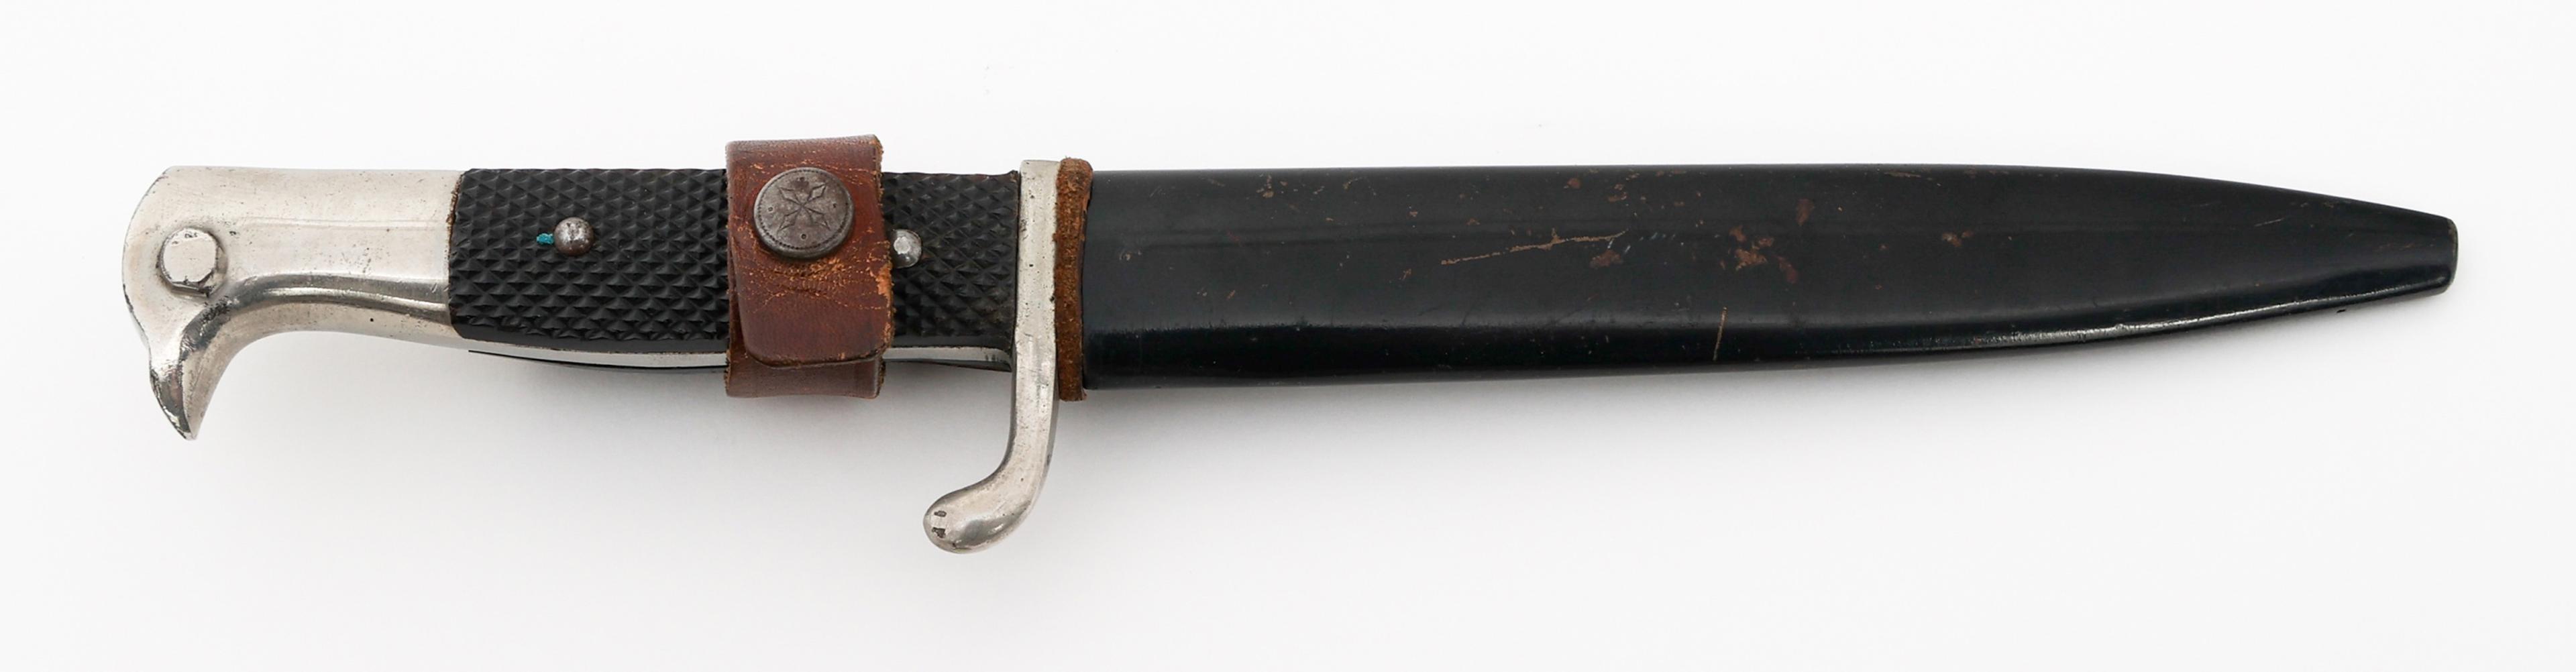 WWII GERMAN BOOT KNIFE WITH SCABBARD